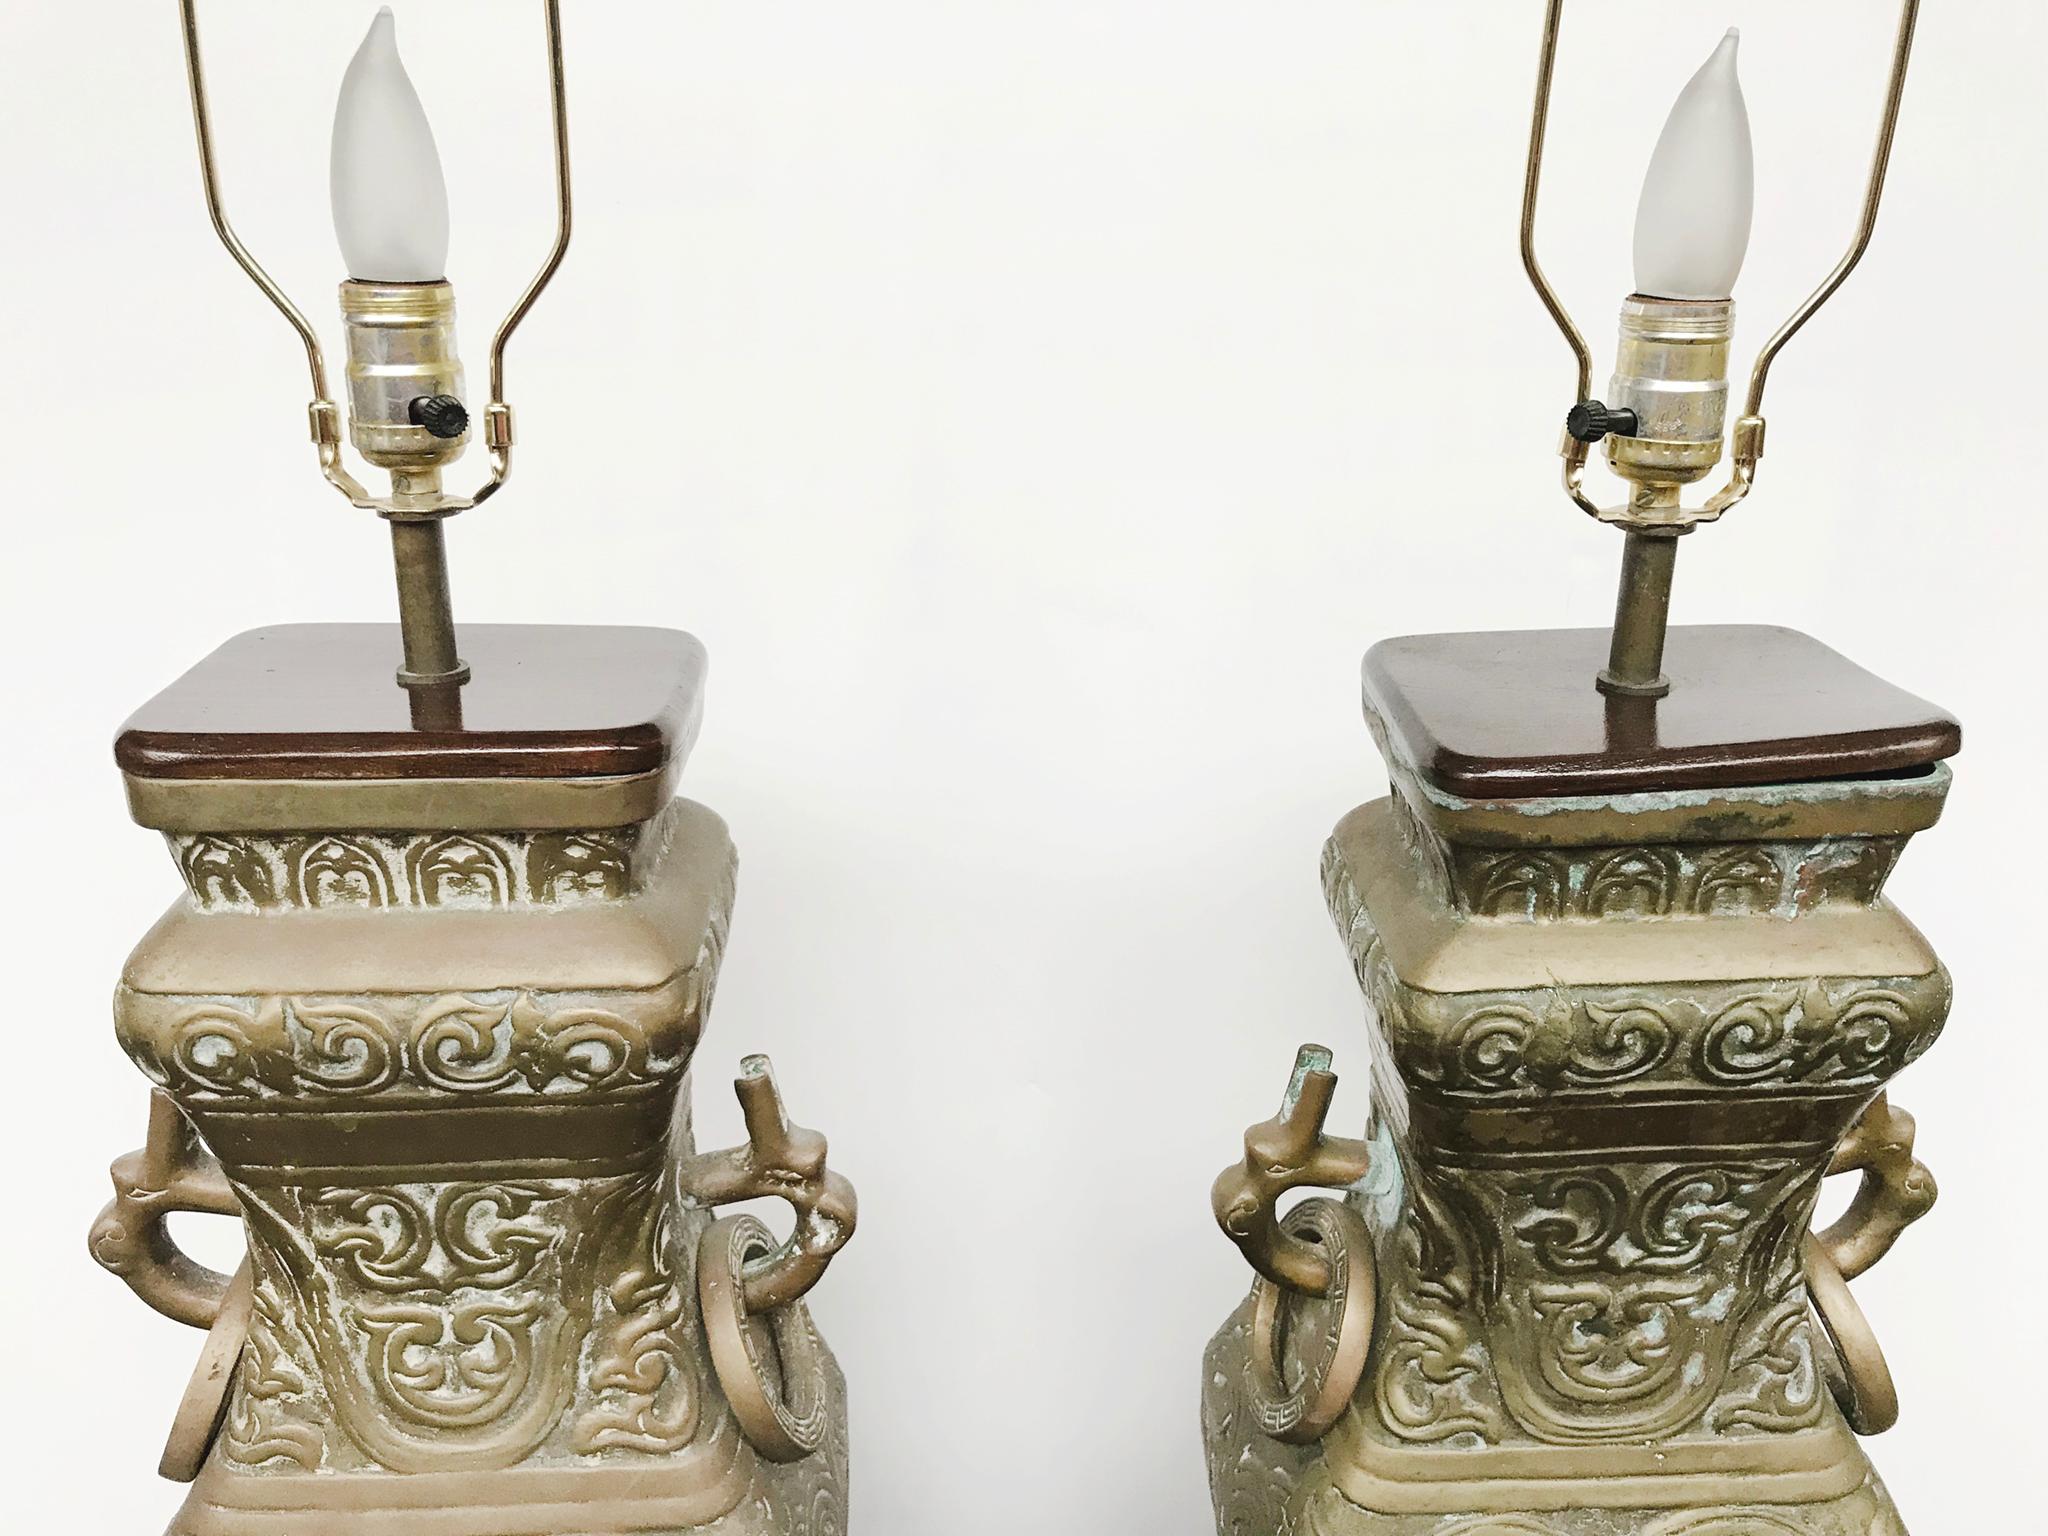 Hollywood Regency Pair of Mid-20th Century James Mont Style Brass Table Lamps